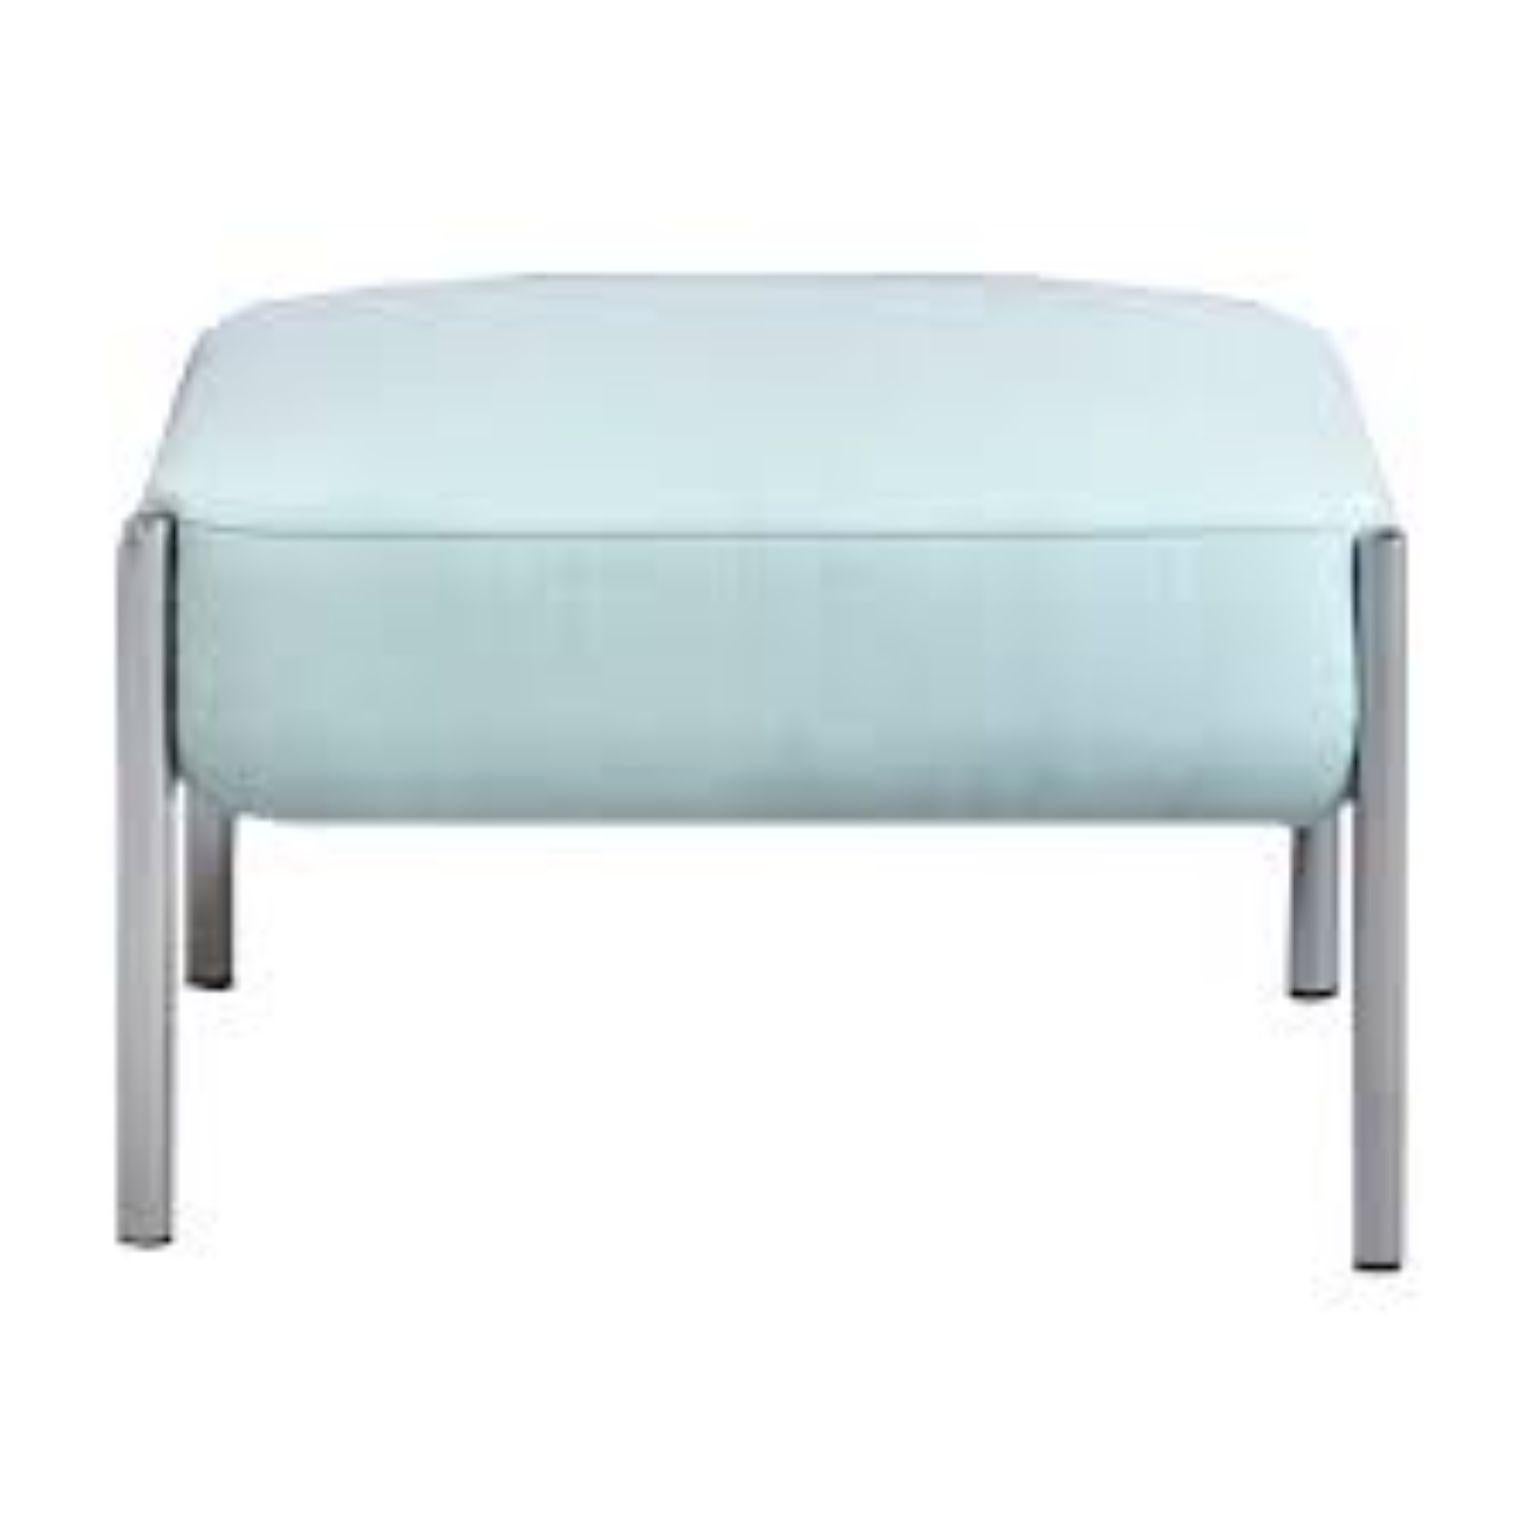 Ara ottoman, blue & chrome by Pepe Albargues
Dimensions: W70, D62, H45
Materials: Base pine wood
Foam CMHR (high resilience and flame retardant) for all our cushion filling systems
Painted iron legs

Also available: Different colors,